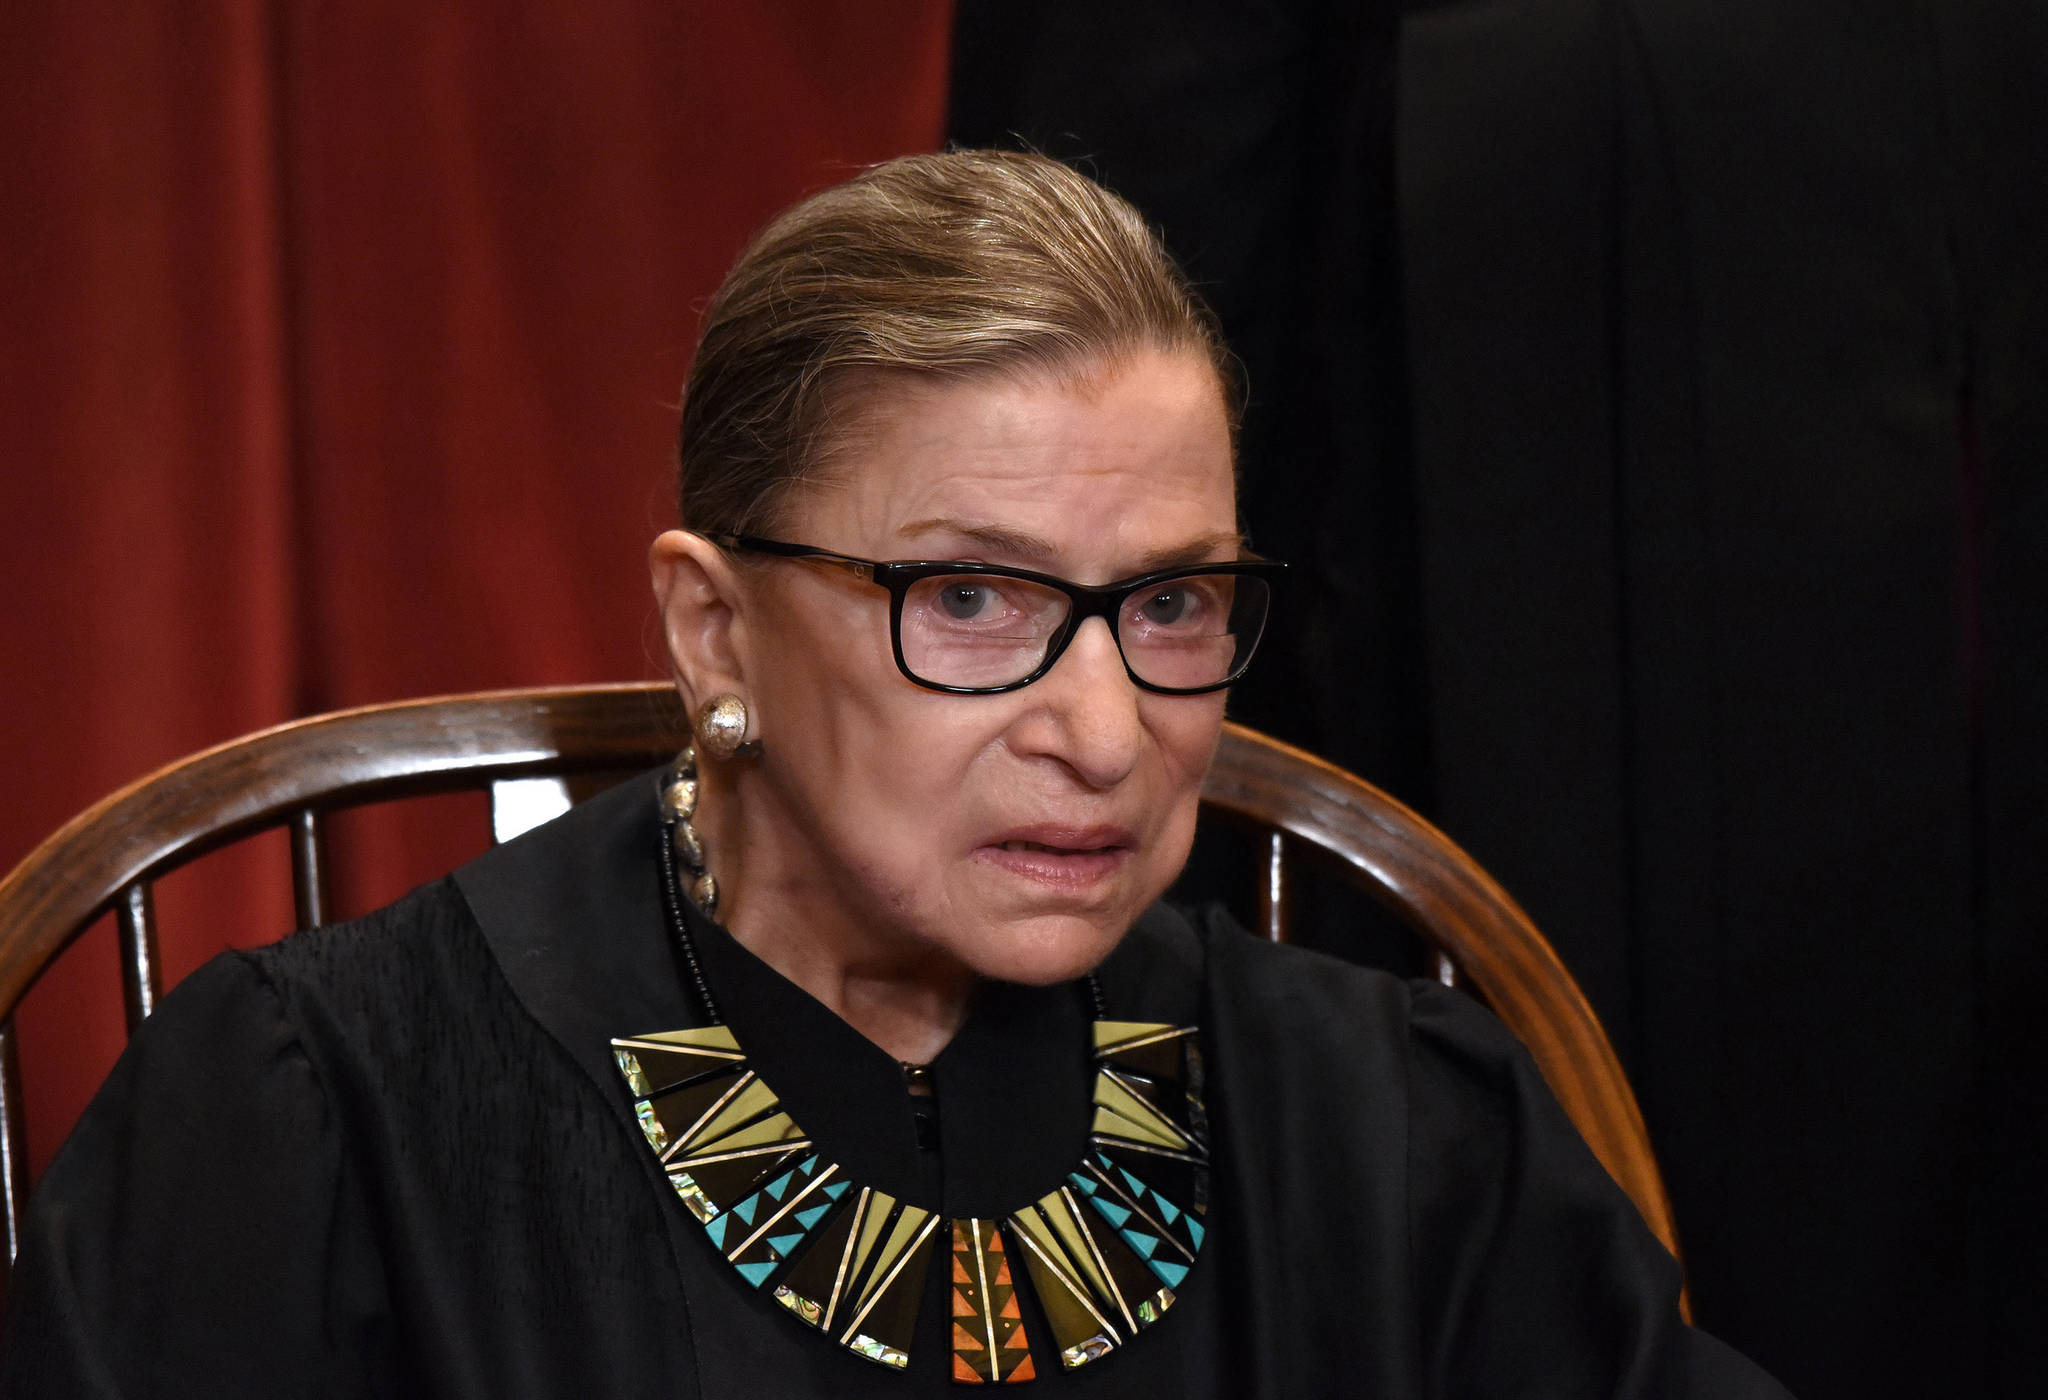 New health scare for Justice Ginsburg emerges as doctors remove cancerous nodules from her lung